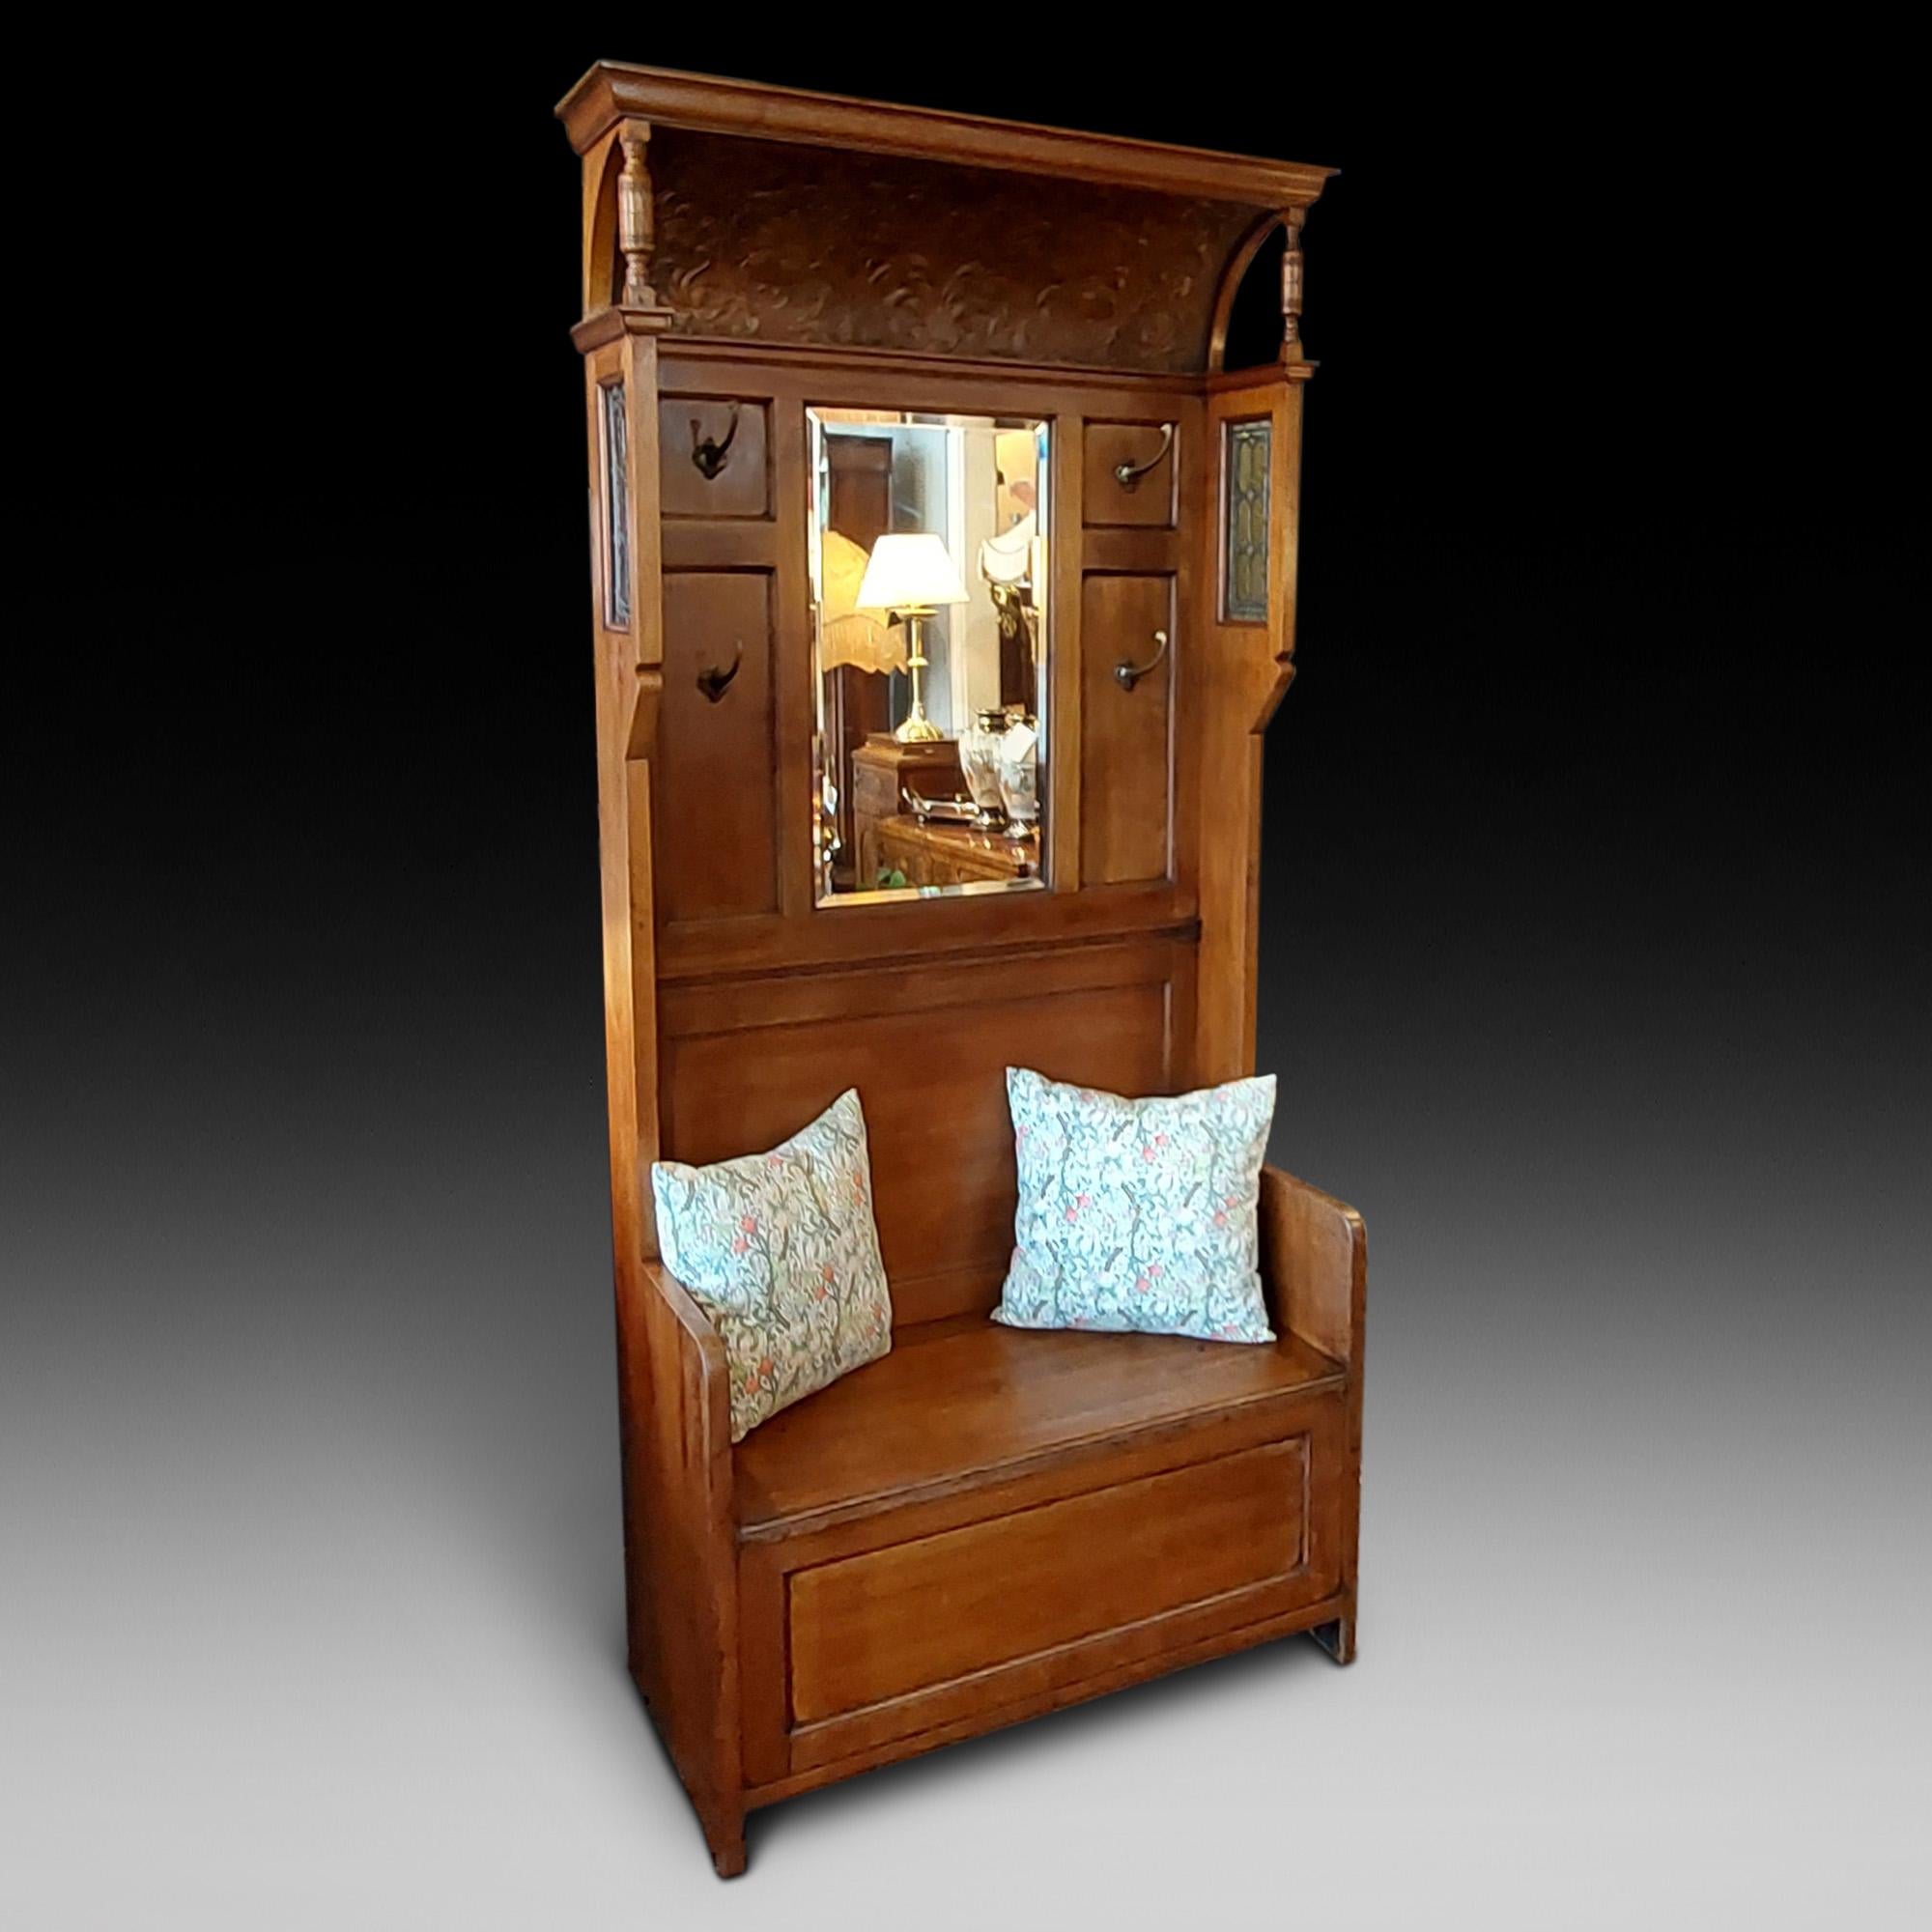 Late Victorian Walnut Hall Stand/Settle having a cavetto floral moulded canopy over a bevelled glass mirror and four brass coat hooks with leaded glass panel sides, over a box base with lift up seat 39